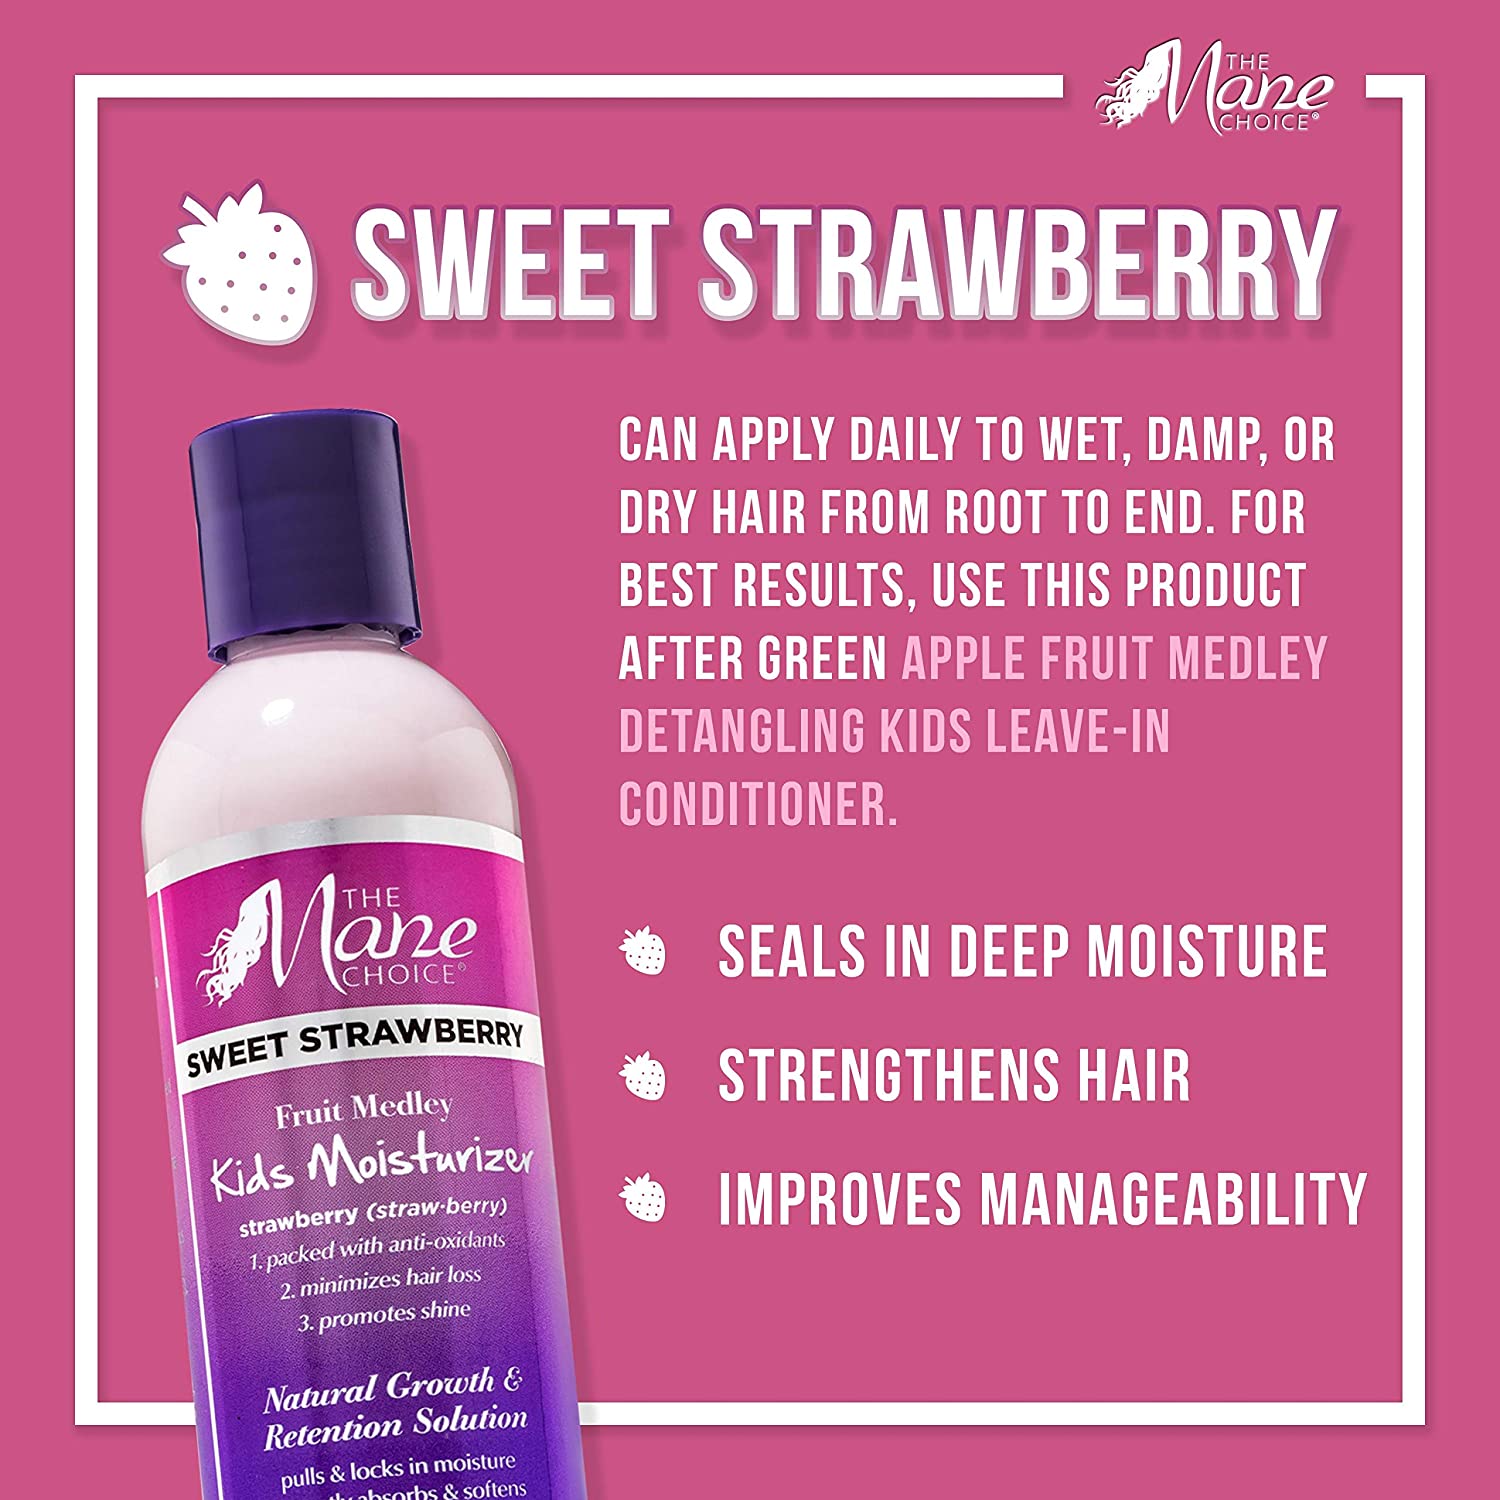 The Mane Choice Sweet Strawberry Fruit Medley Kids Moisturizer, 8 Ounce Find Your New Look Today!